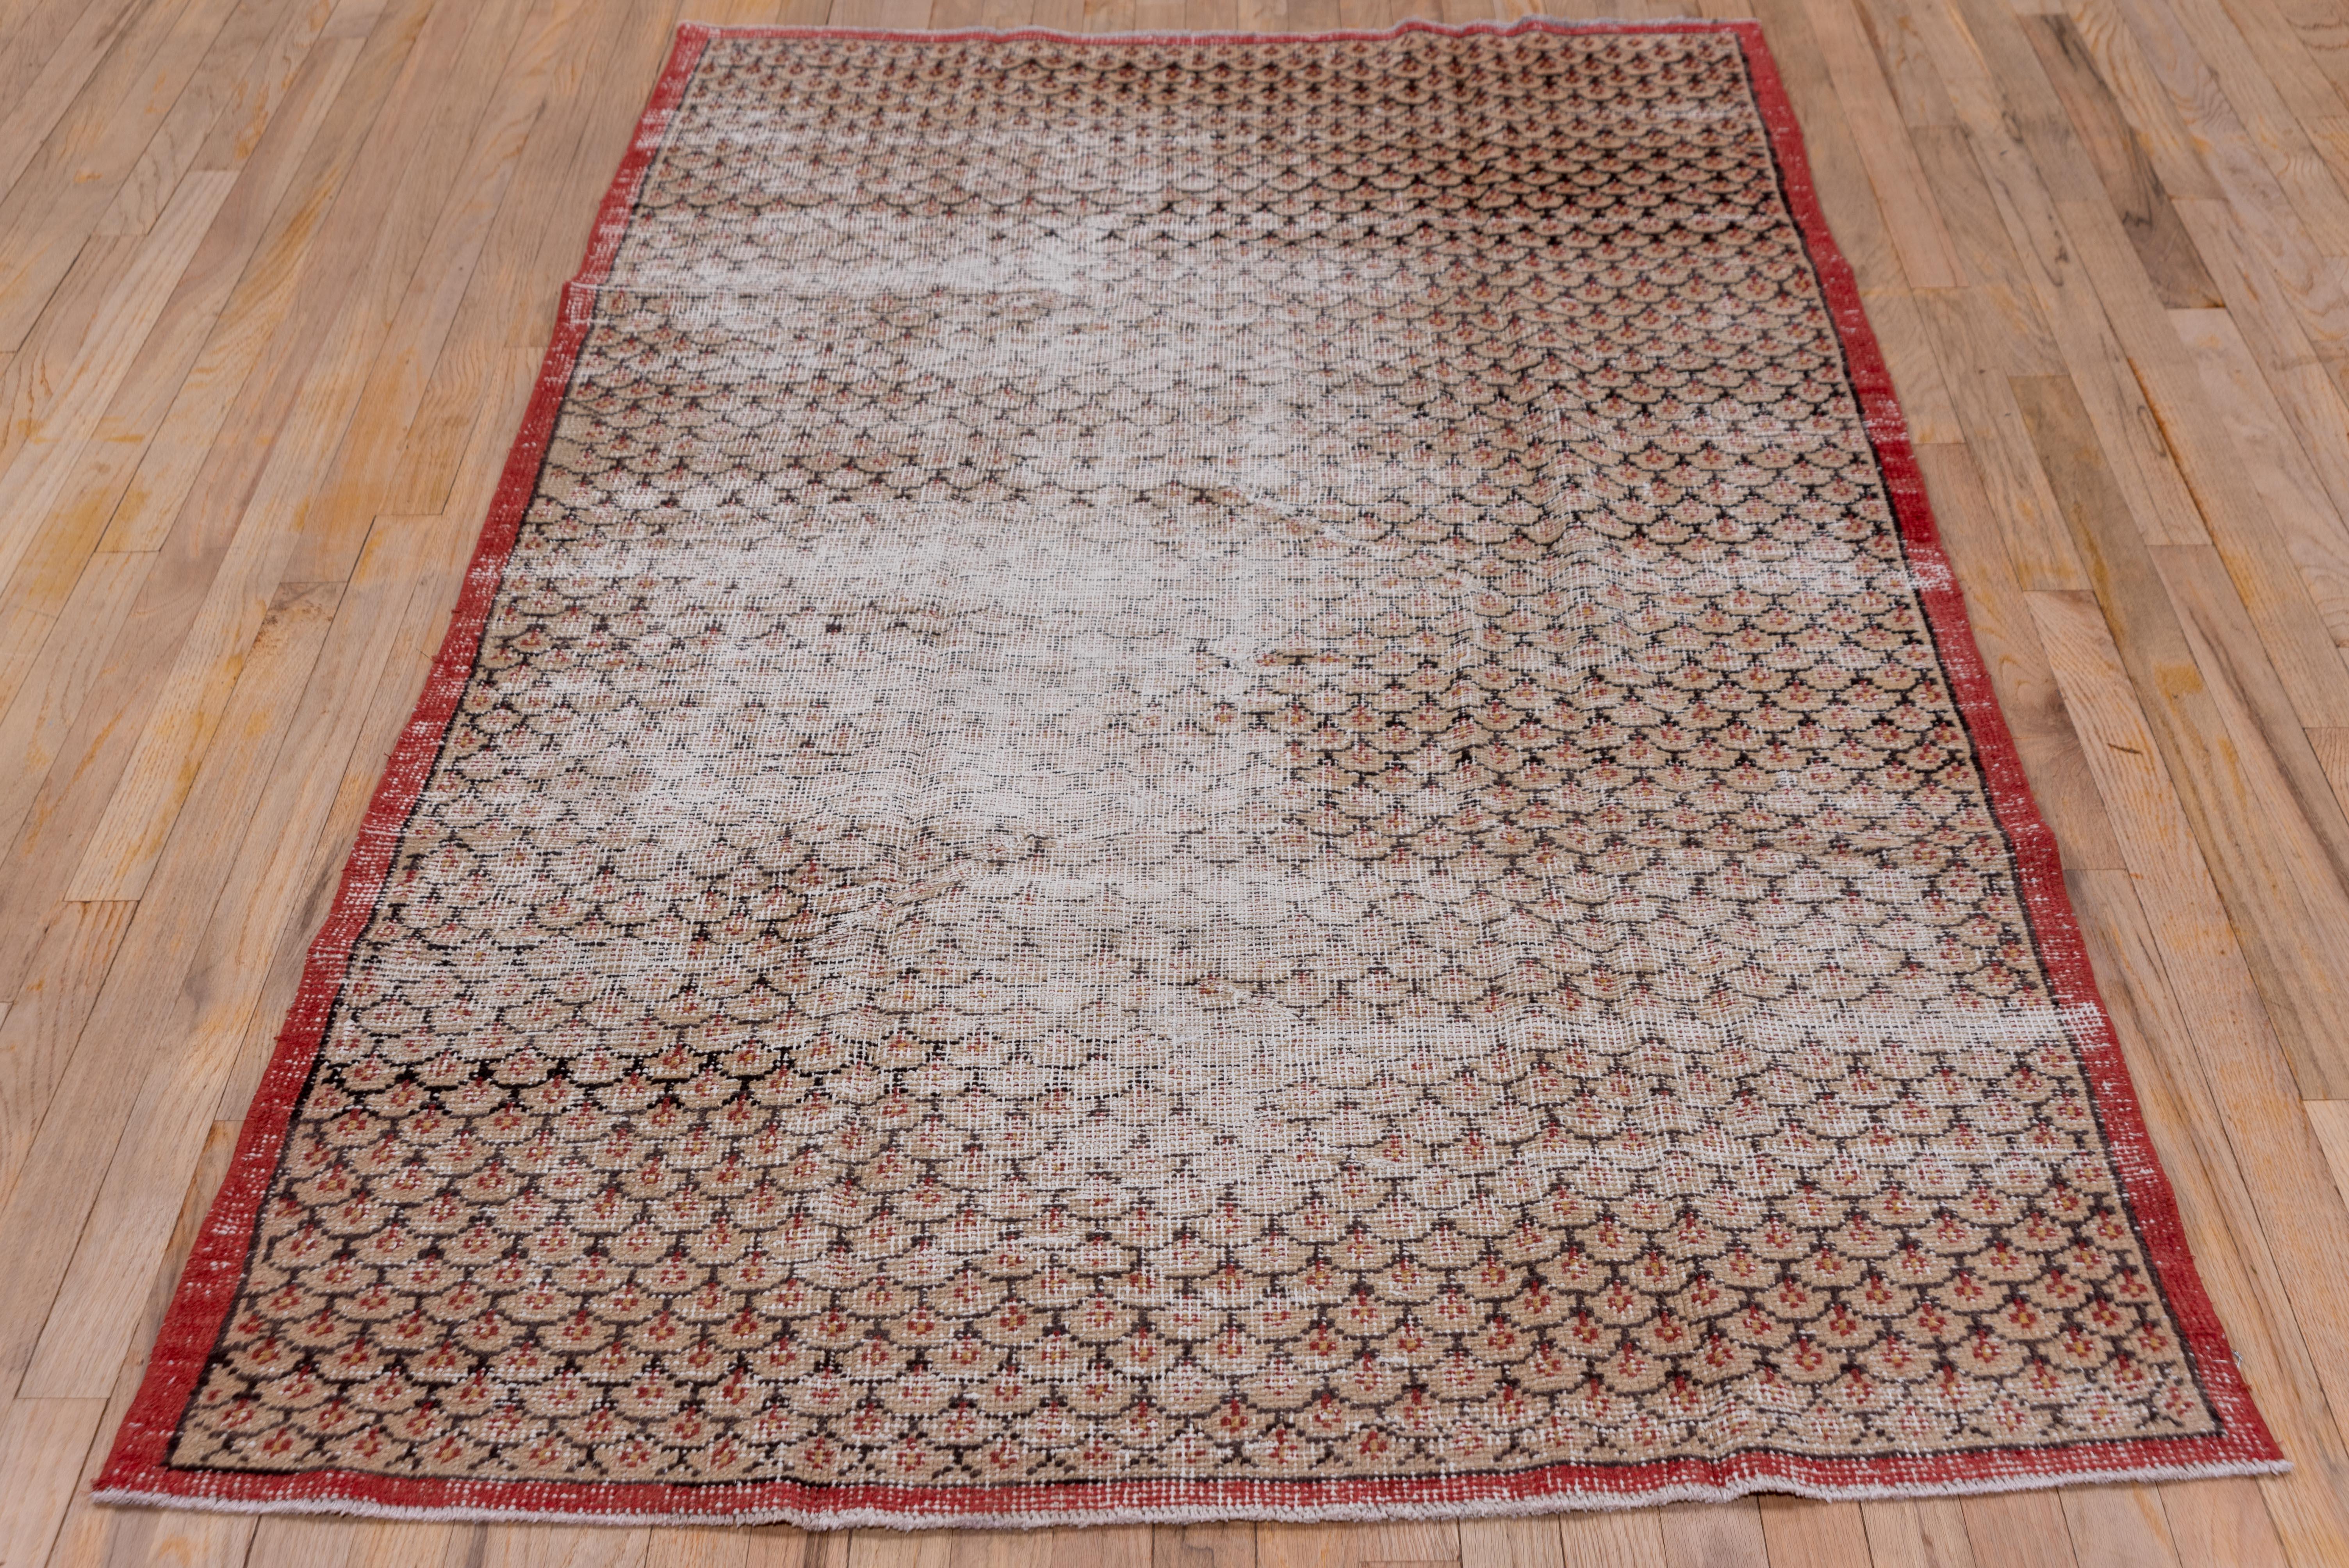 20th Century Washed Oushak Rug from Turkey - 1930 For Sale